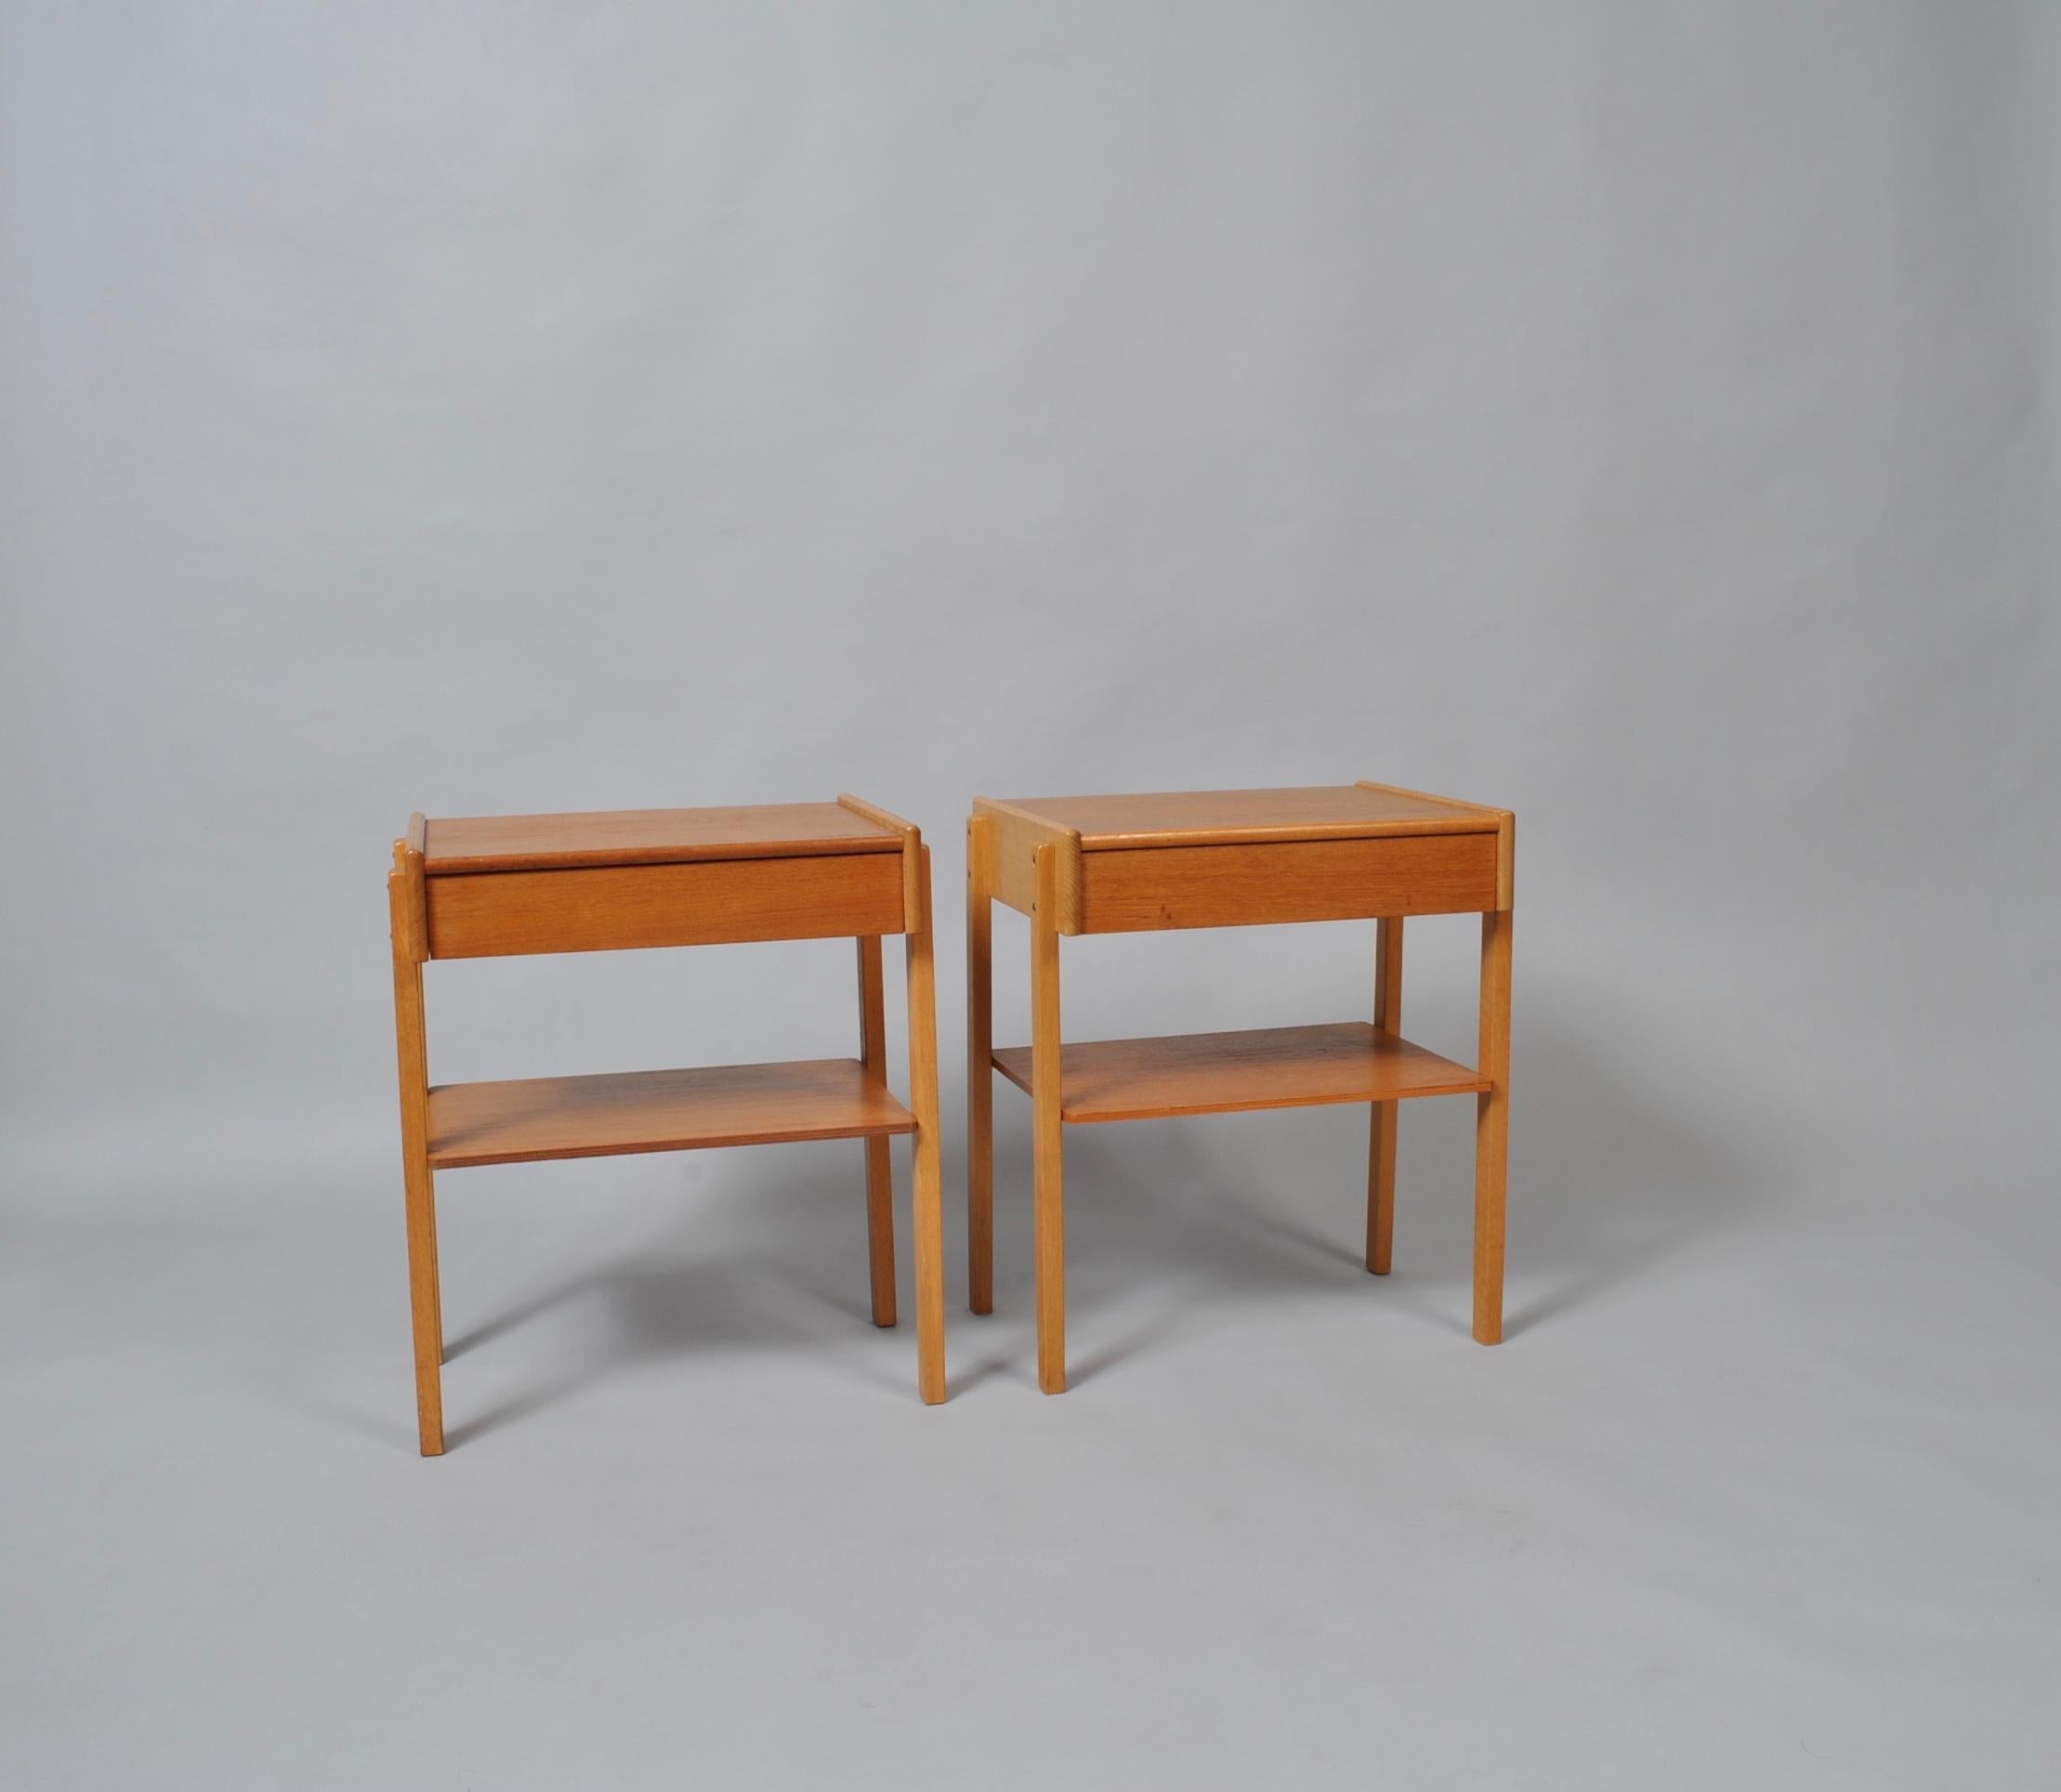 Pair of Danish midcentury nightstands/end tables produced, circa 1960. Each with one drawer. Made from oak and teak. Thoroughly cleaned, waxed and polished. 
Nice Scandinavia Minimalist design.